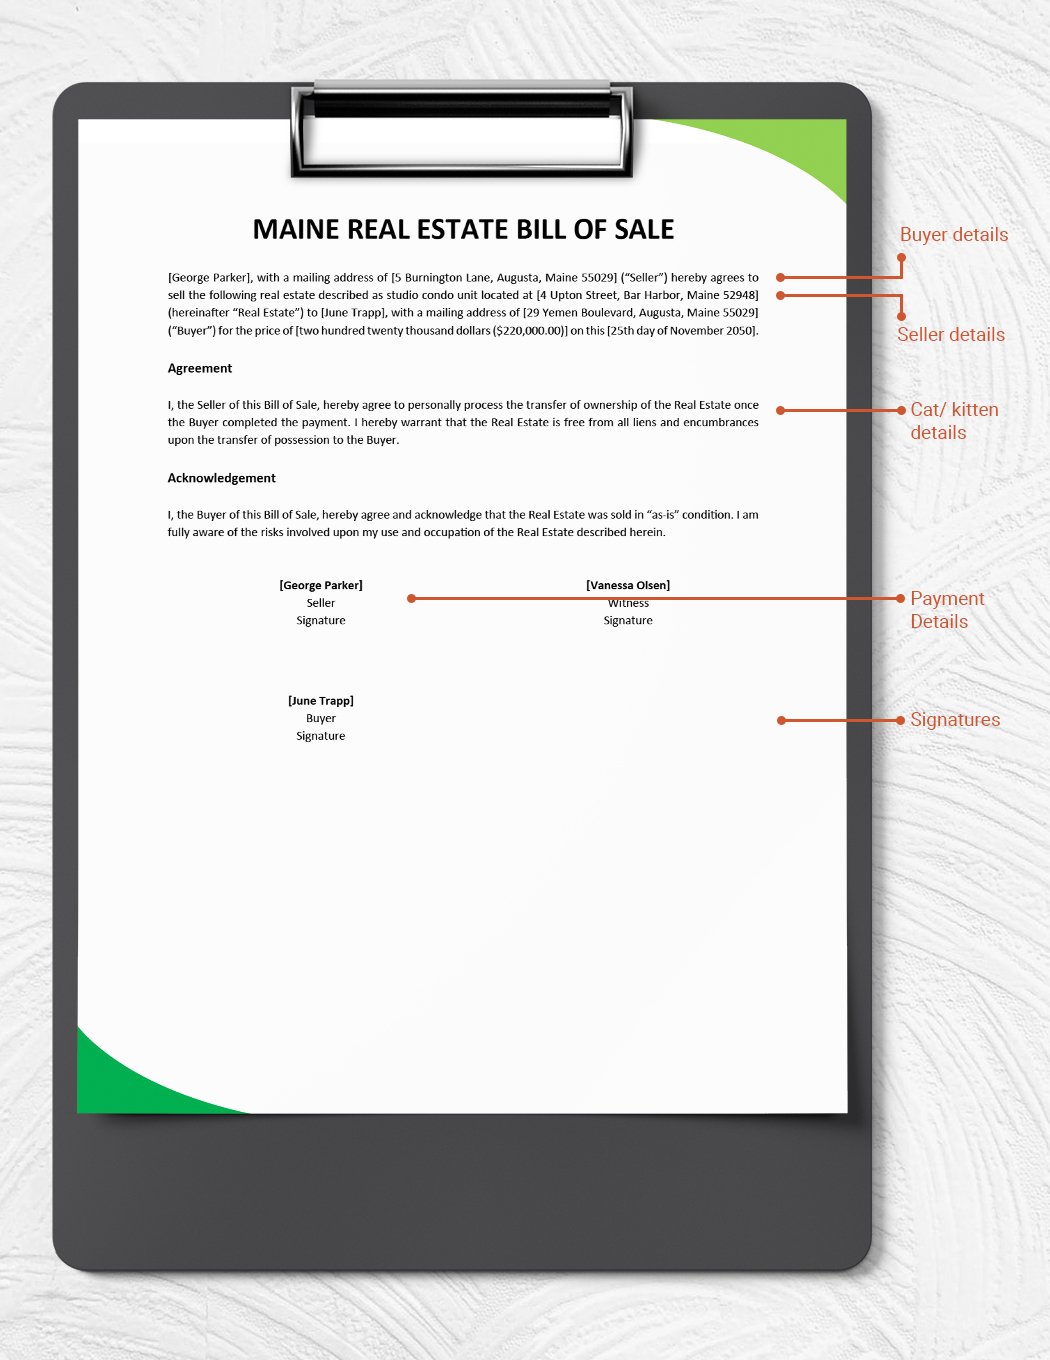 Maine Real Estate Bill of Sale Template